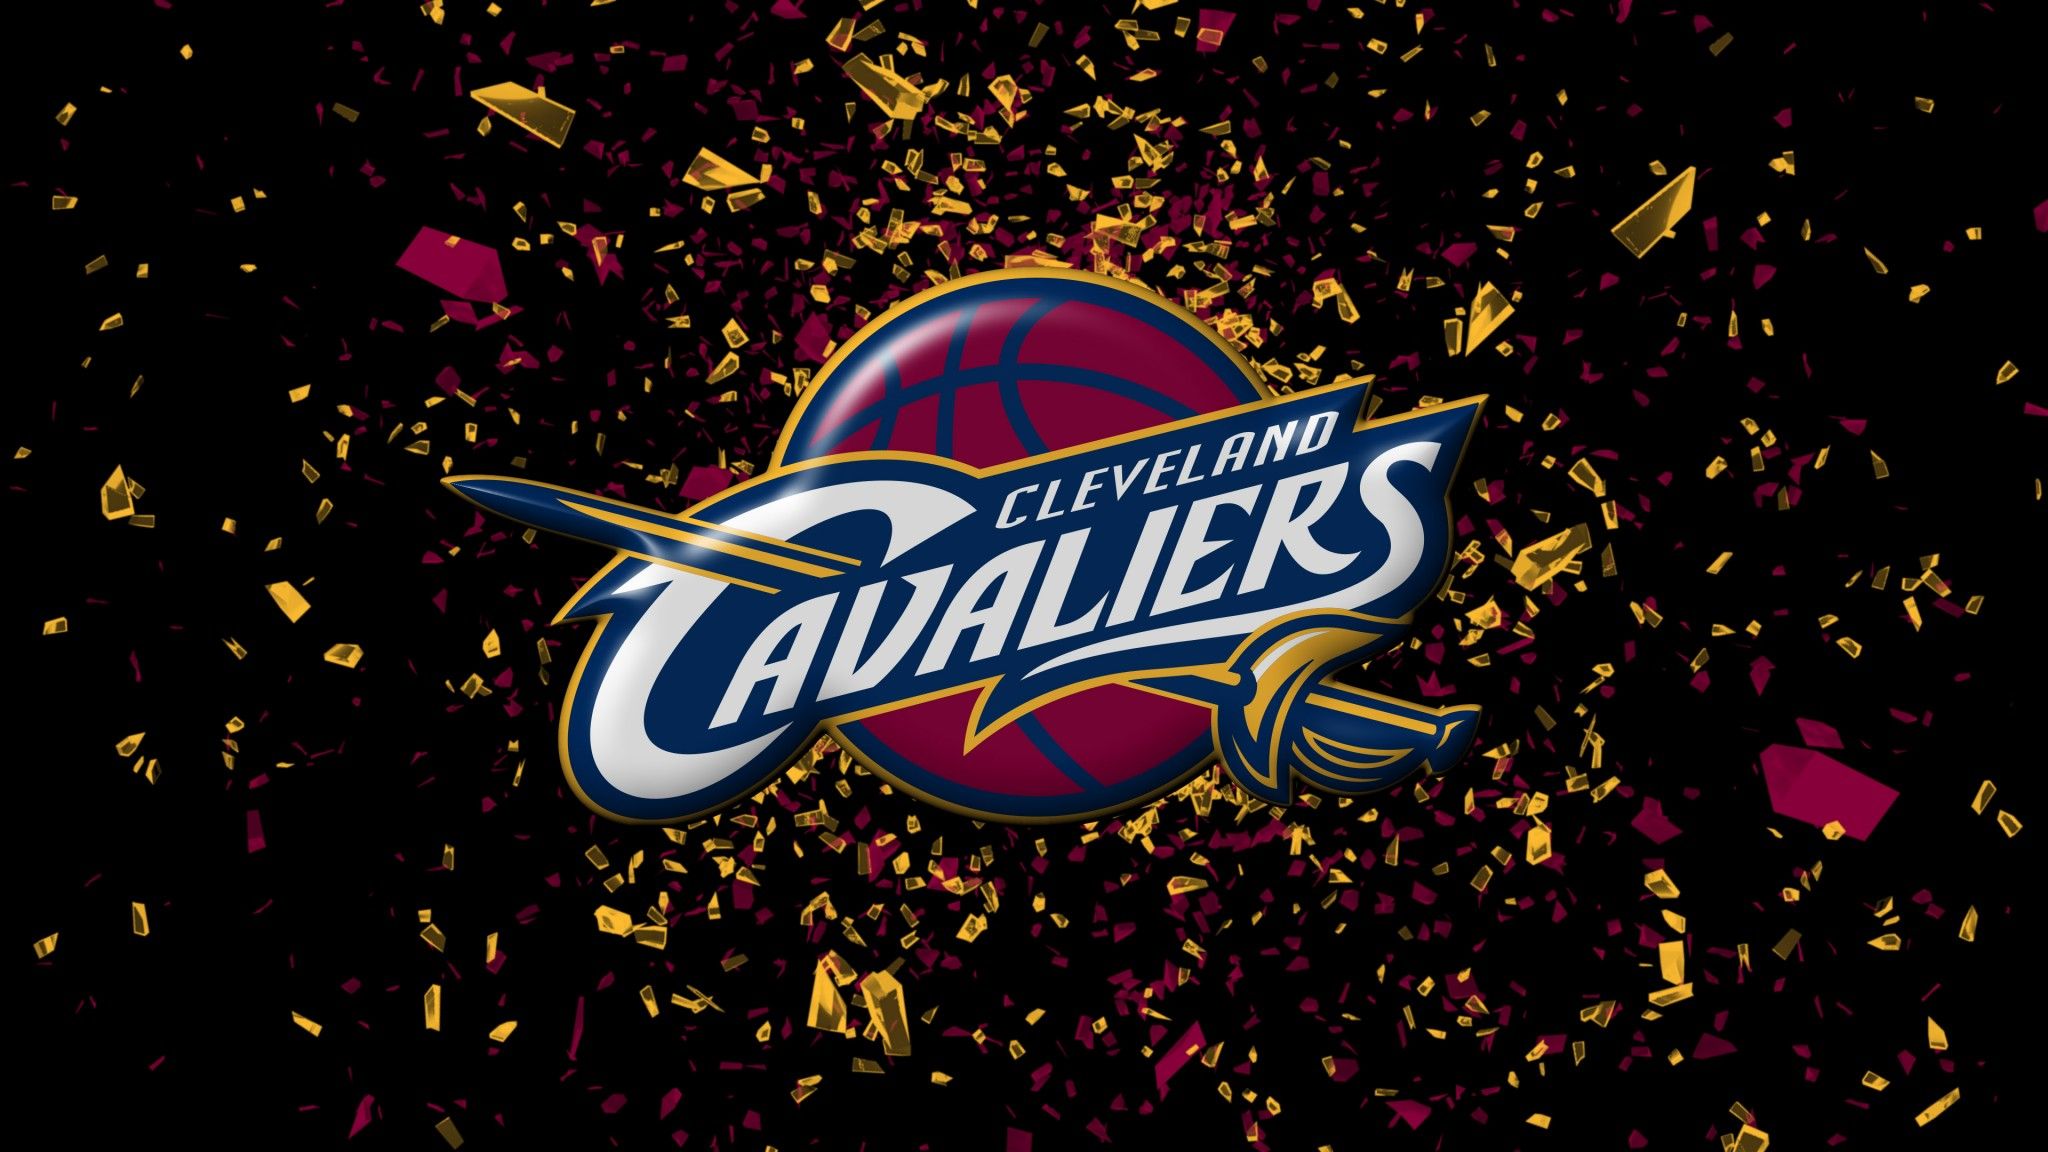 Cleveland Cavaliers Logo Wallpaper Free Download. Cavaliers wallpaper, Basketball wallpaper, Cleveland cavaliers logo